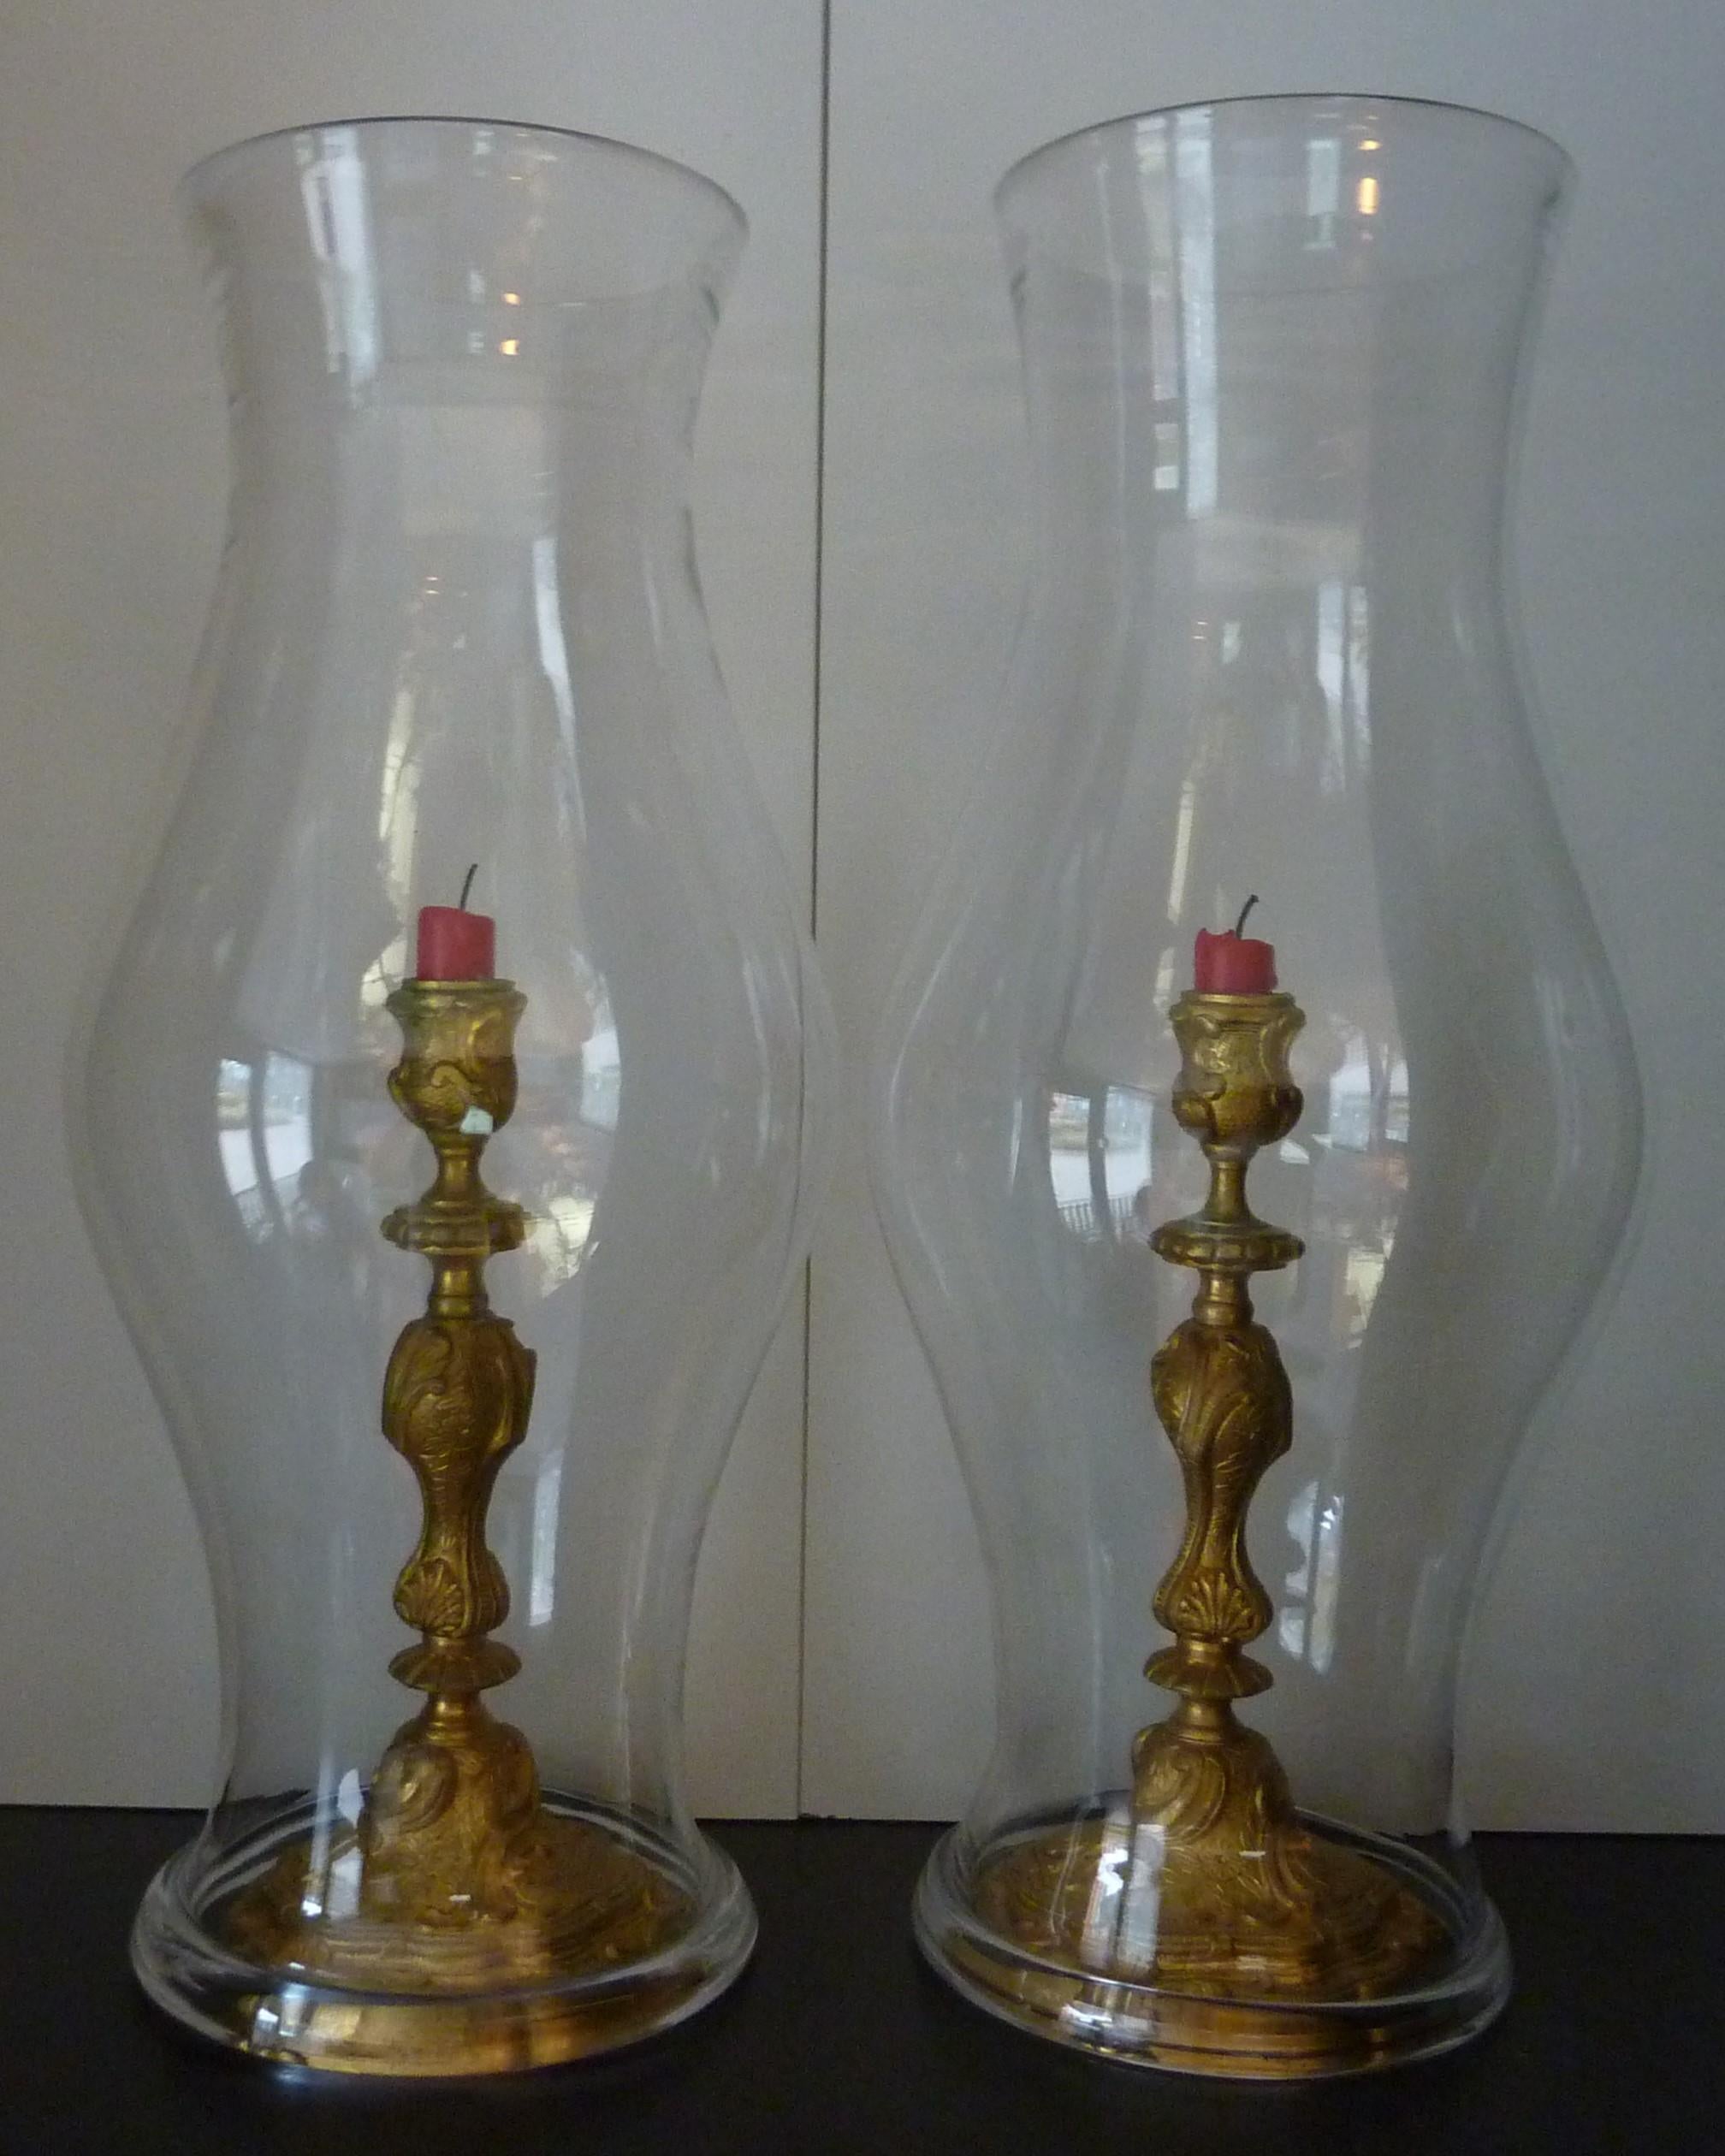 20th century crystal mouth-blown hurricane candle shades
These hurricanes are used in windy areas to prevent candles to be extinguished.
They could be used above the fireplace or in a hallway.

Made in the original crystal glass factory in